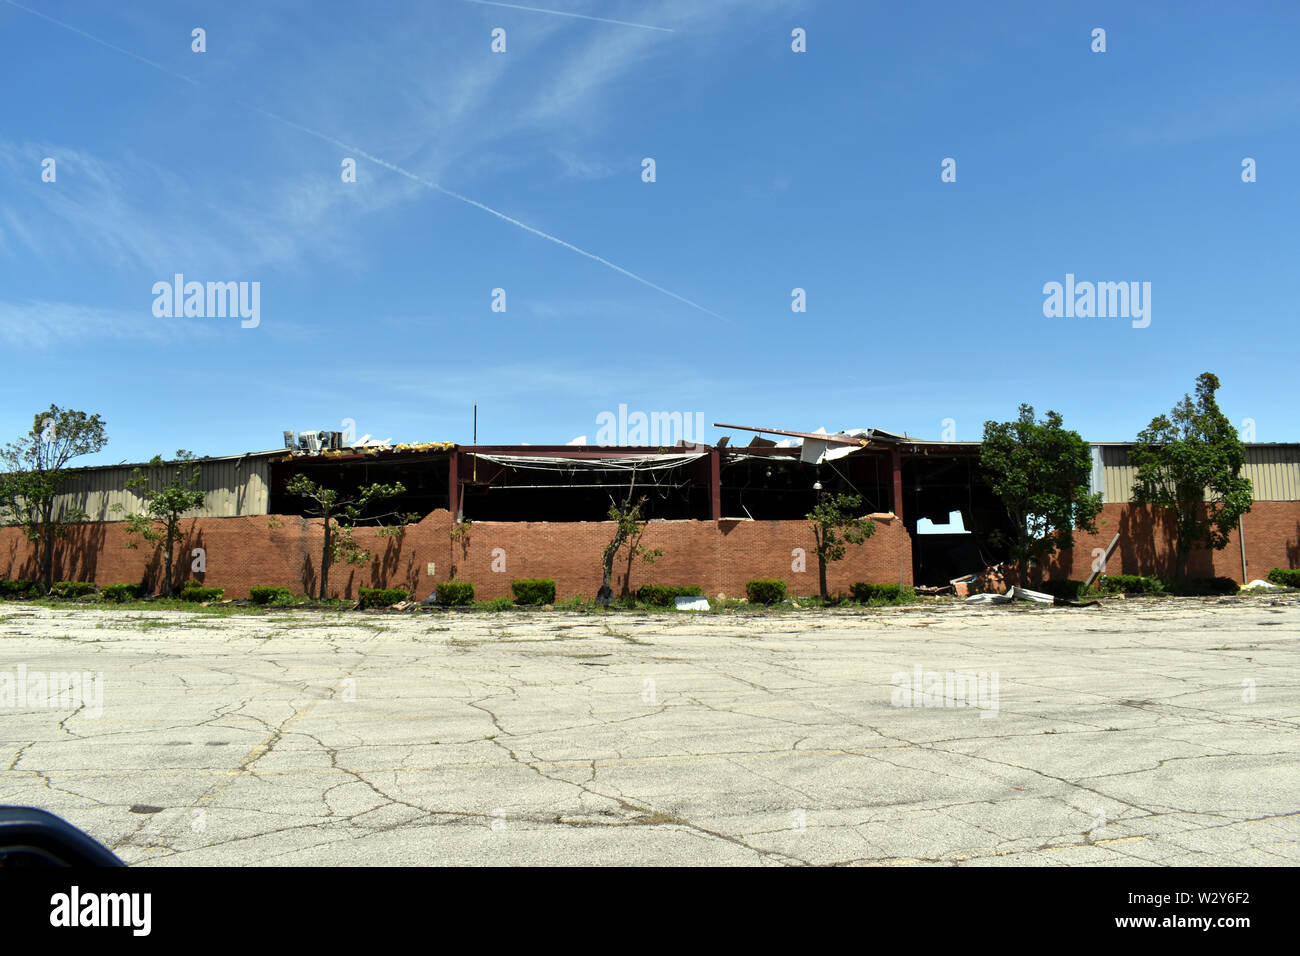 Tornado damage that occurred on May 27, 2019 in the Dayton, Ohio vicinity Stock Photo